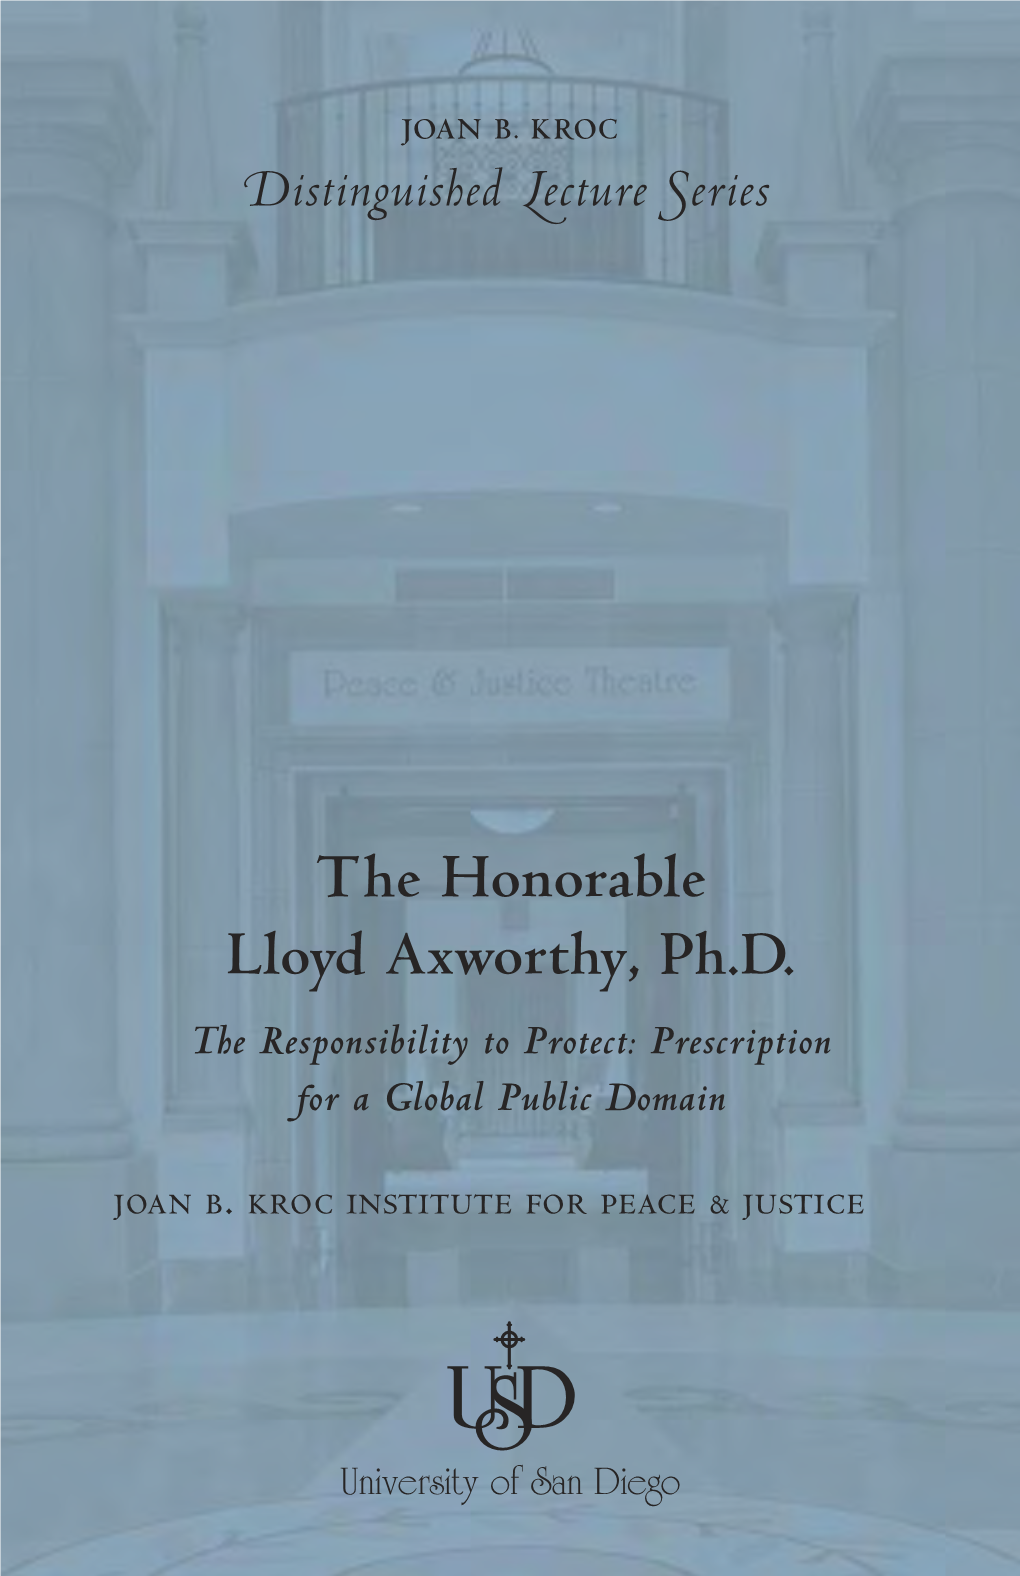 The Honorable Lloyd Axworthy, Ph.D. the Responsibility to Protect: Prescription for a Global Public Domain Delivered on the 10Th of February, 2005 at the Joan B